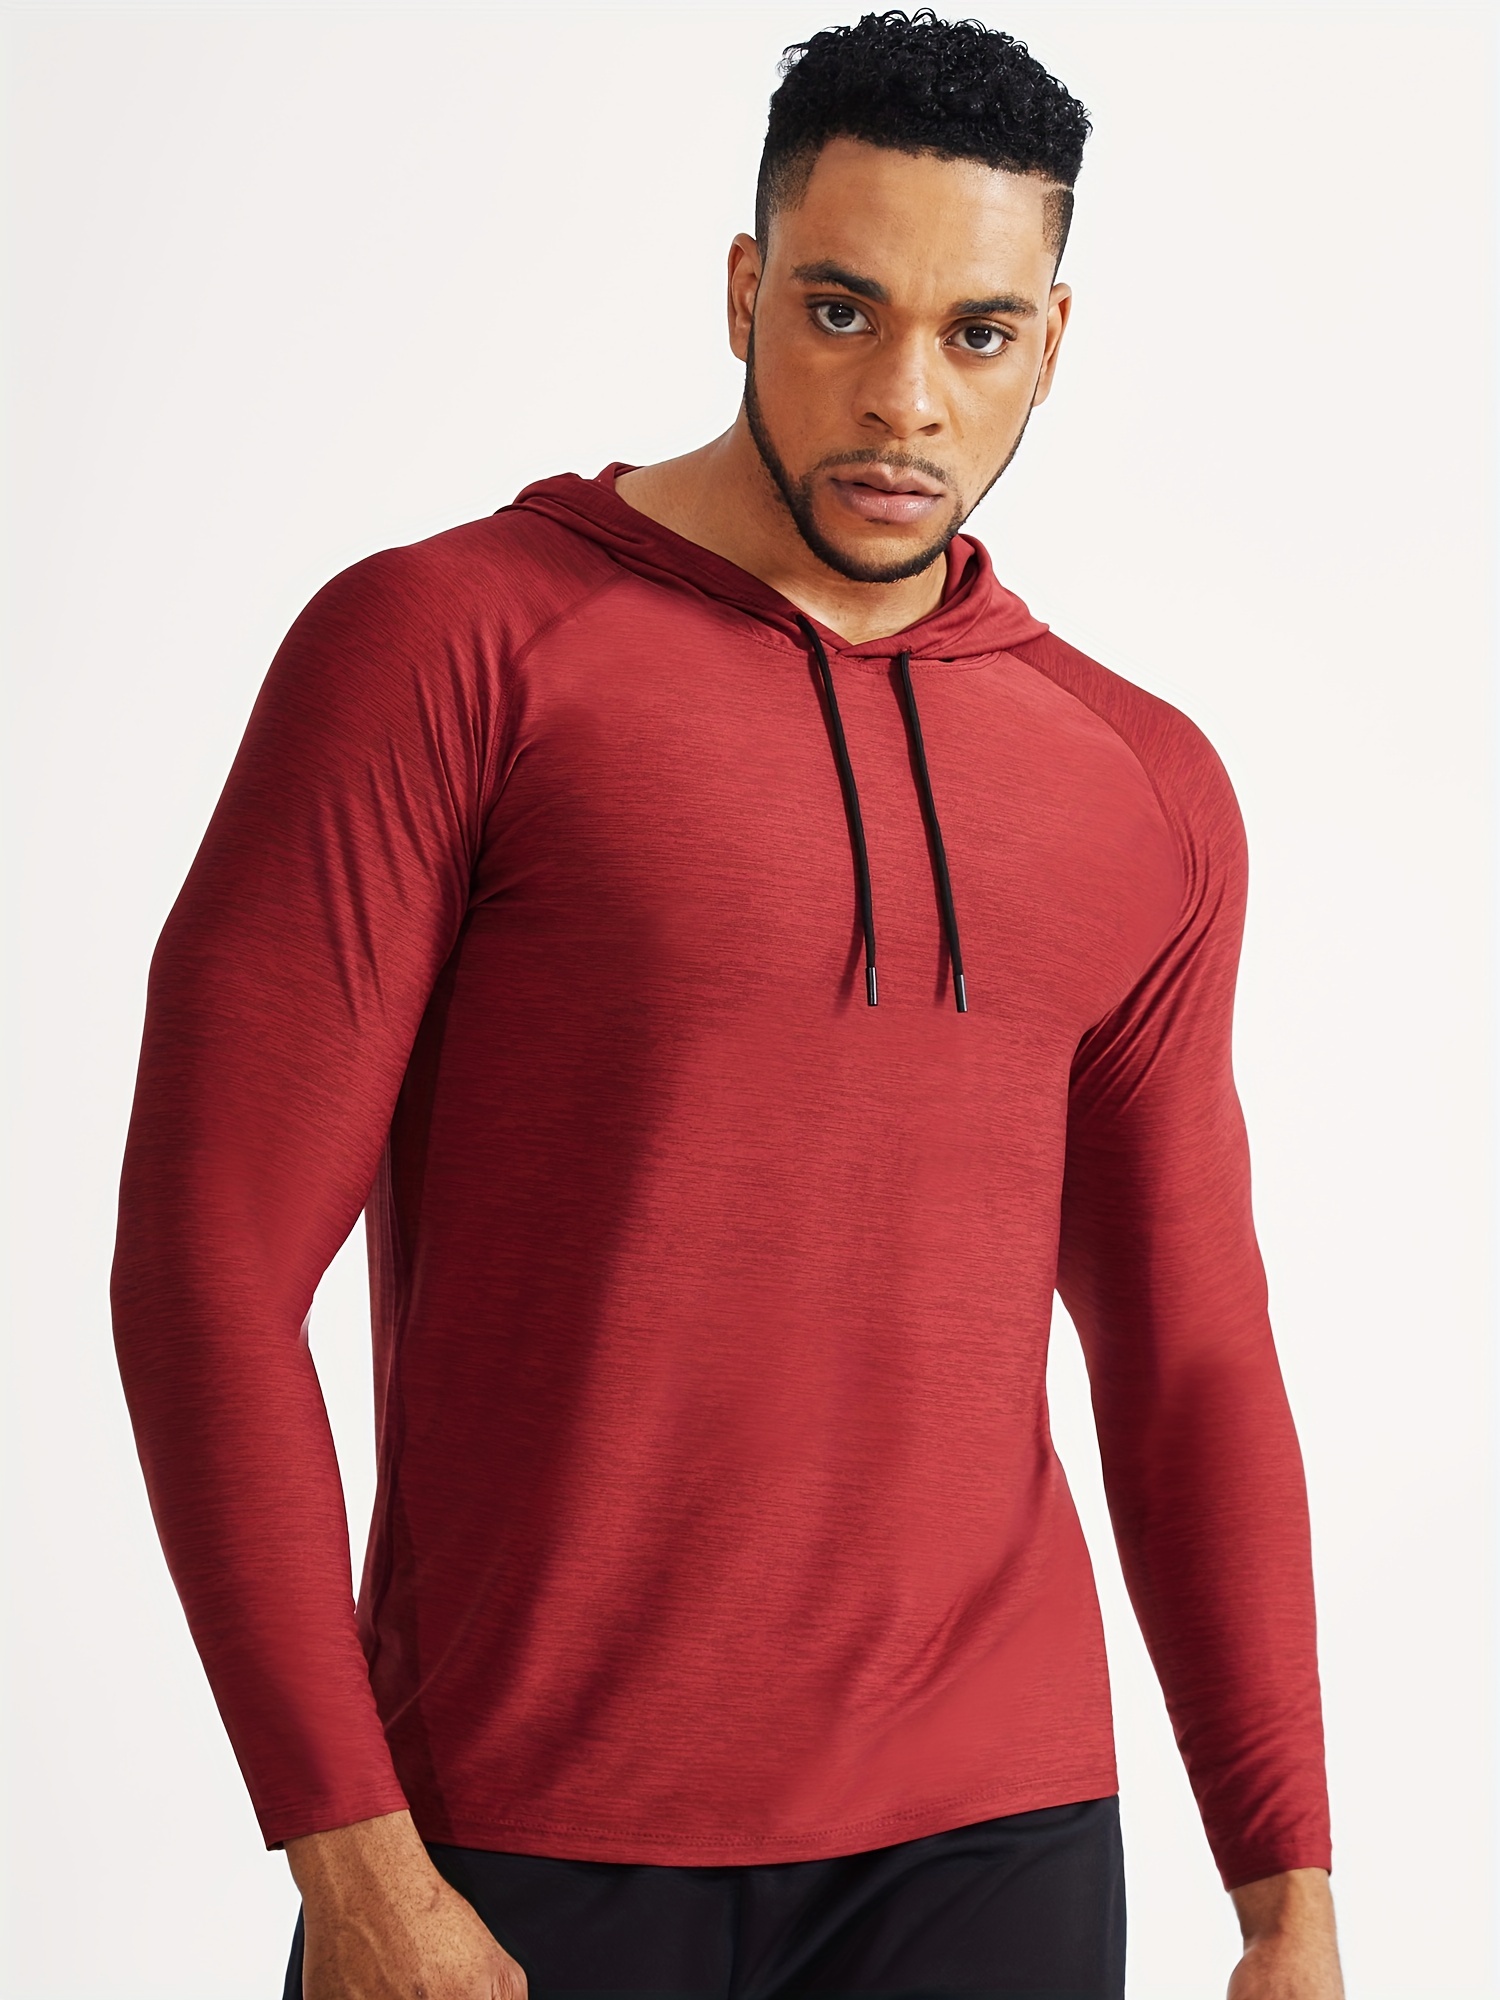 Hooded Athletic Long Sleeve Shirts for Men